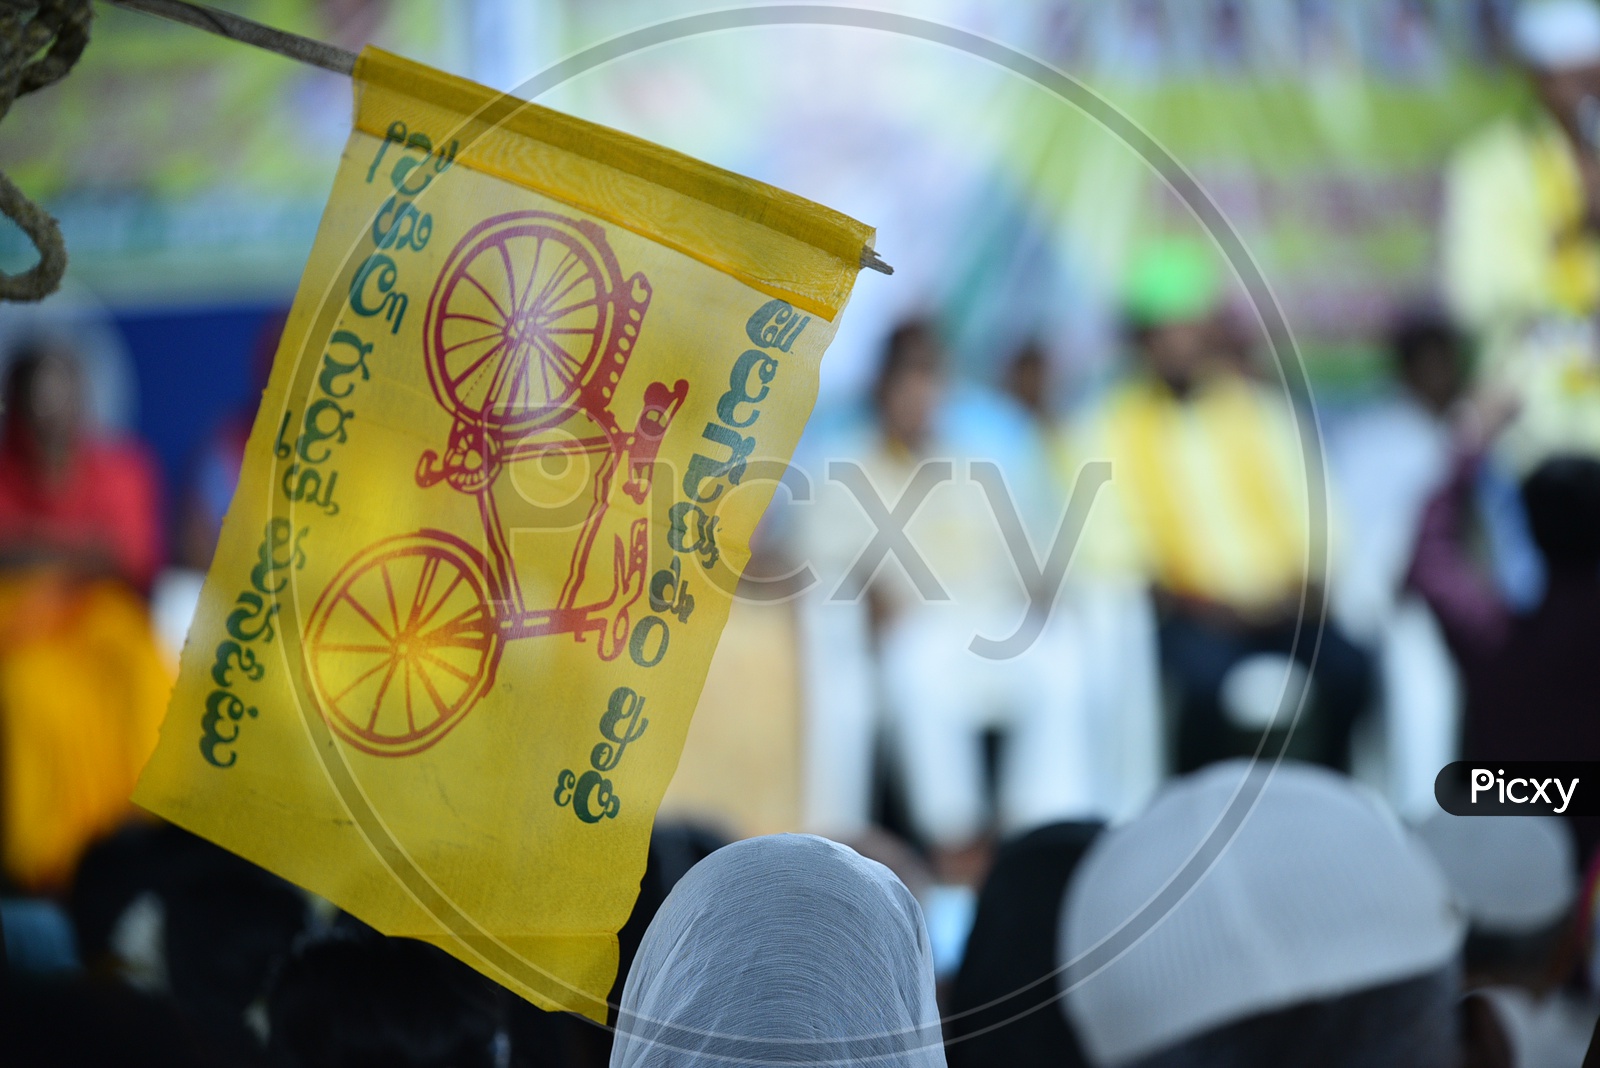 TDP Flags During Election Campaign Rally